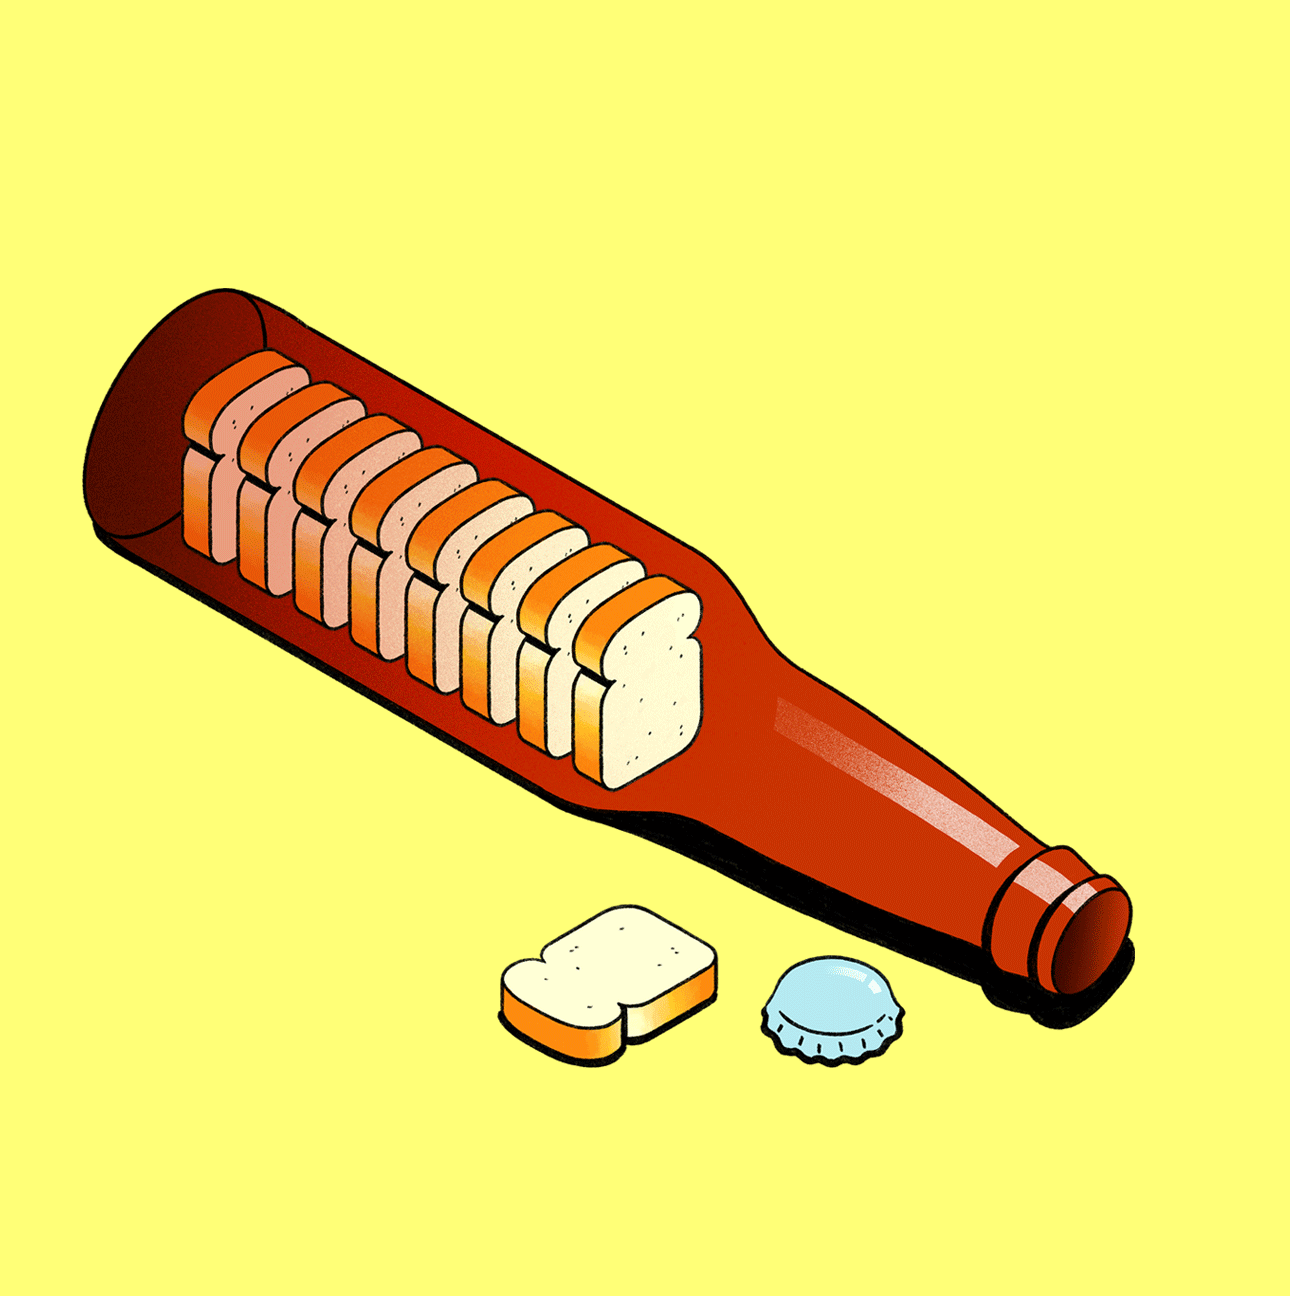 Gif of an illustration of a beer bottle with little bread slice dominoes falling inside the bottle.